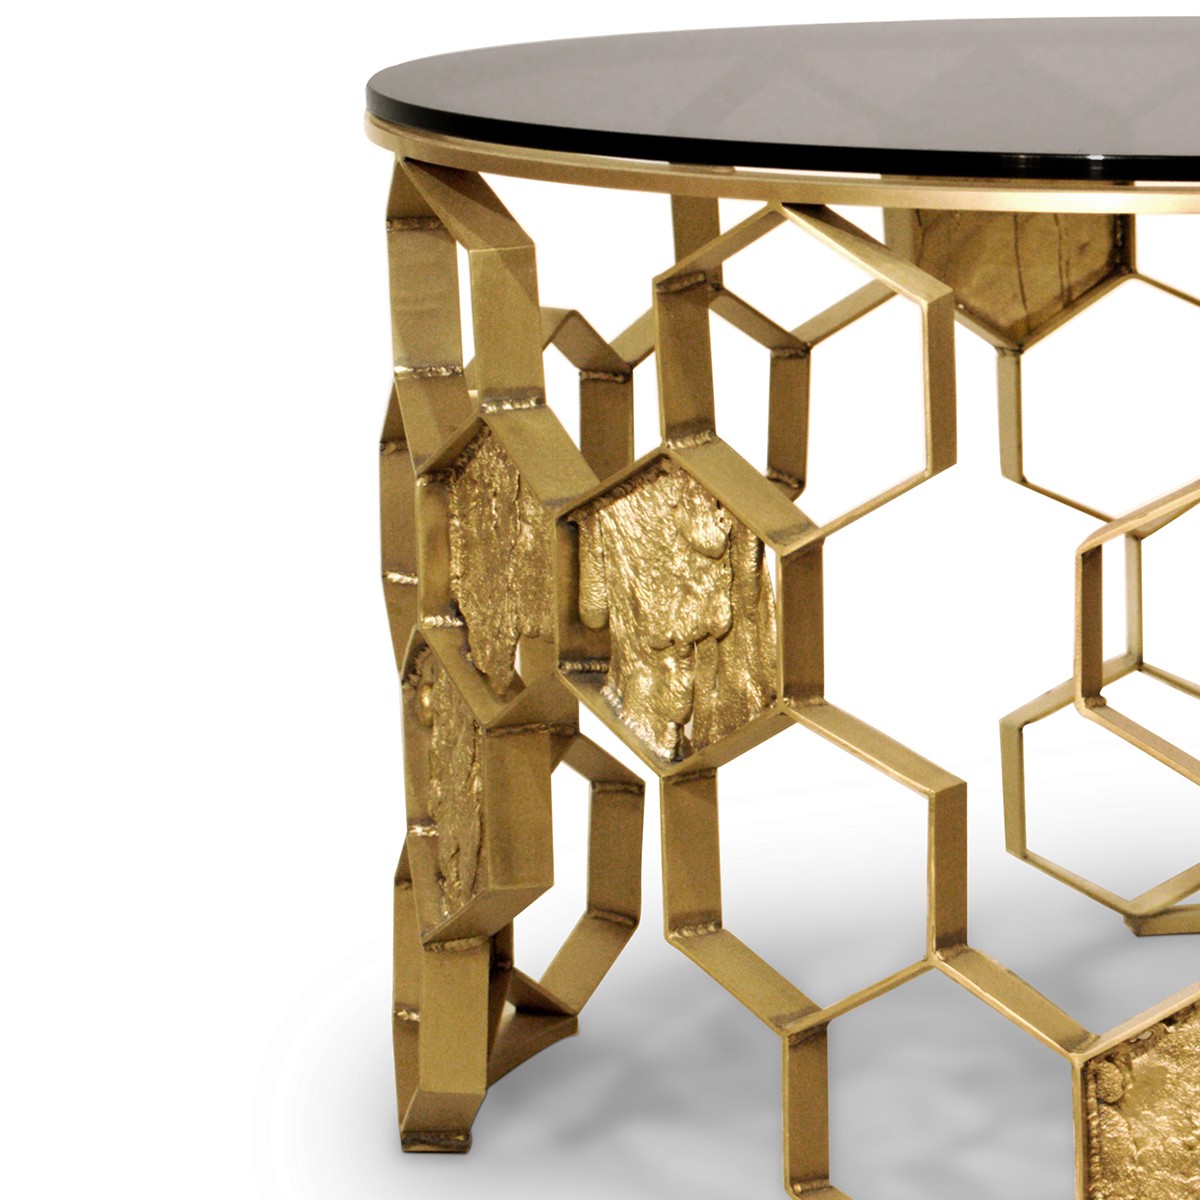 Manuka Center Table: The Ethereal Spectrum Of Nature